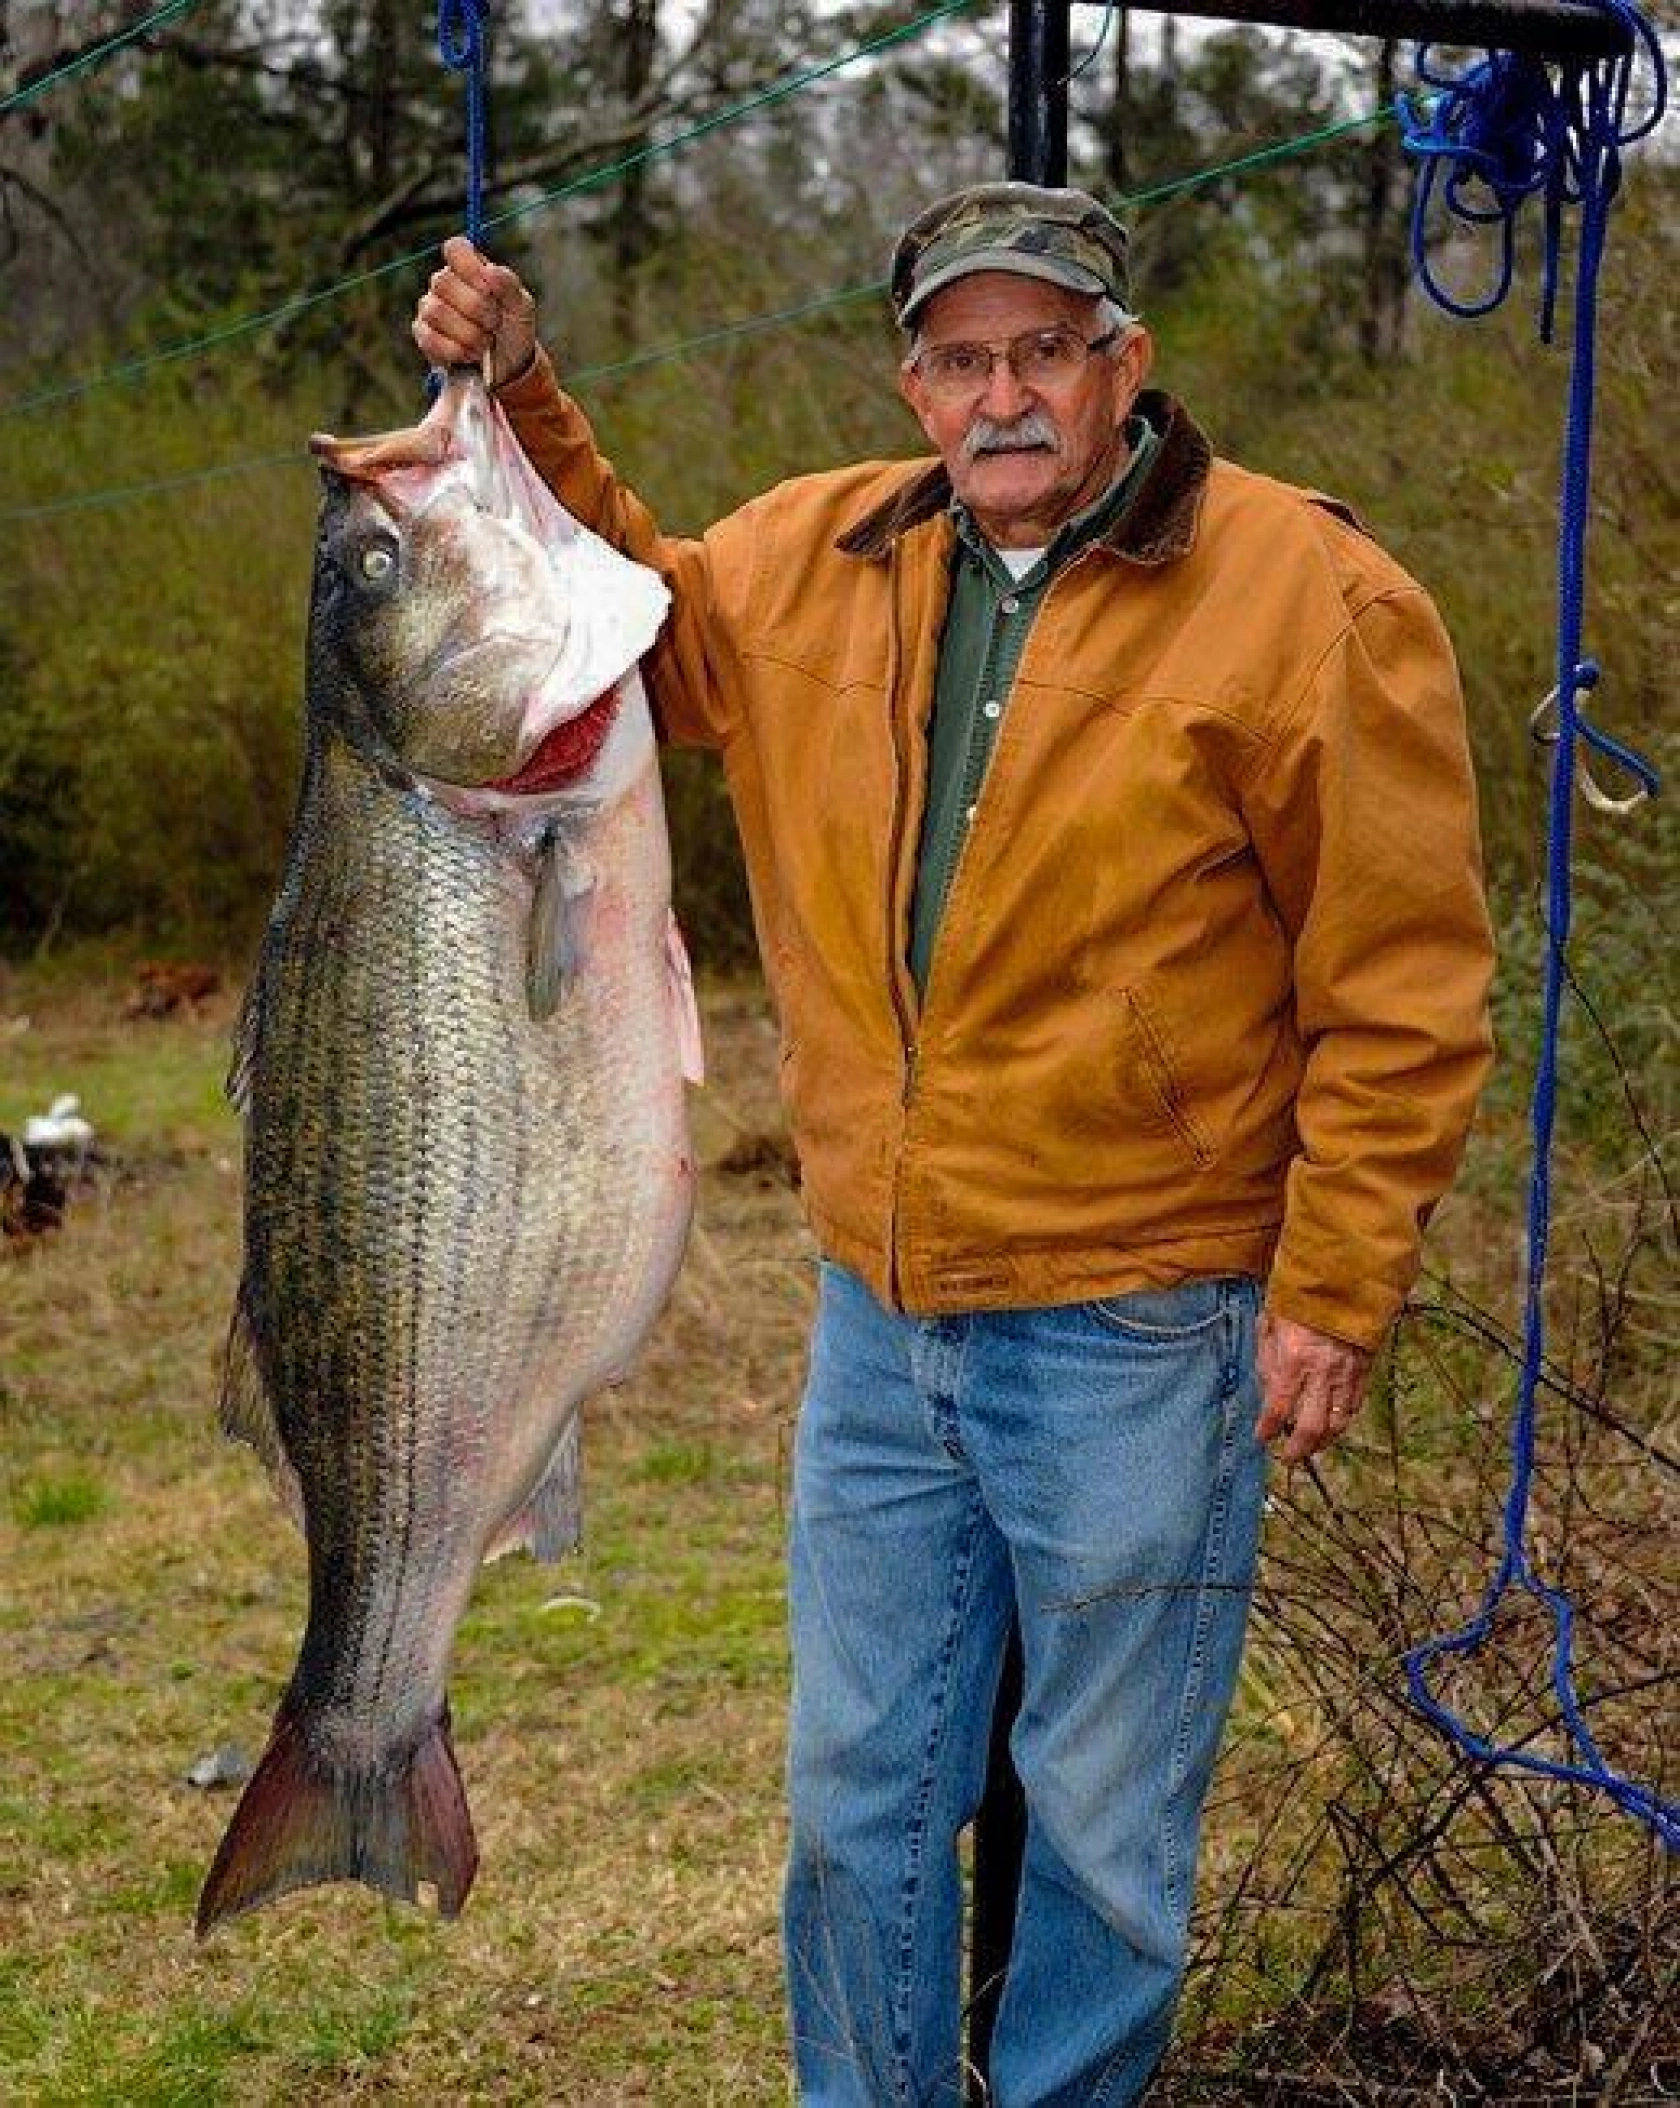 James Bramlett set the bass fishing records in Alabama for striped bass.